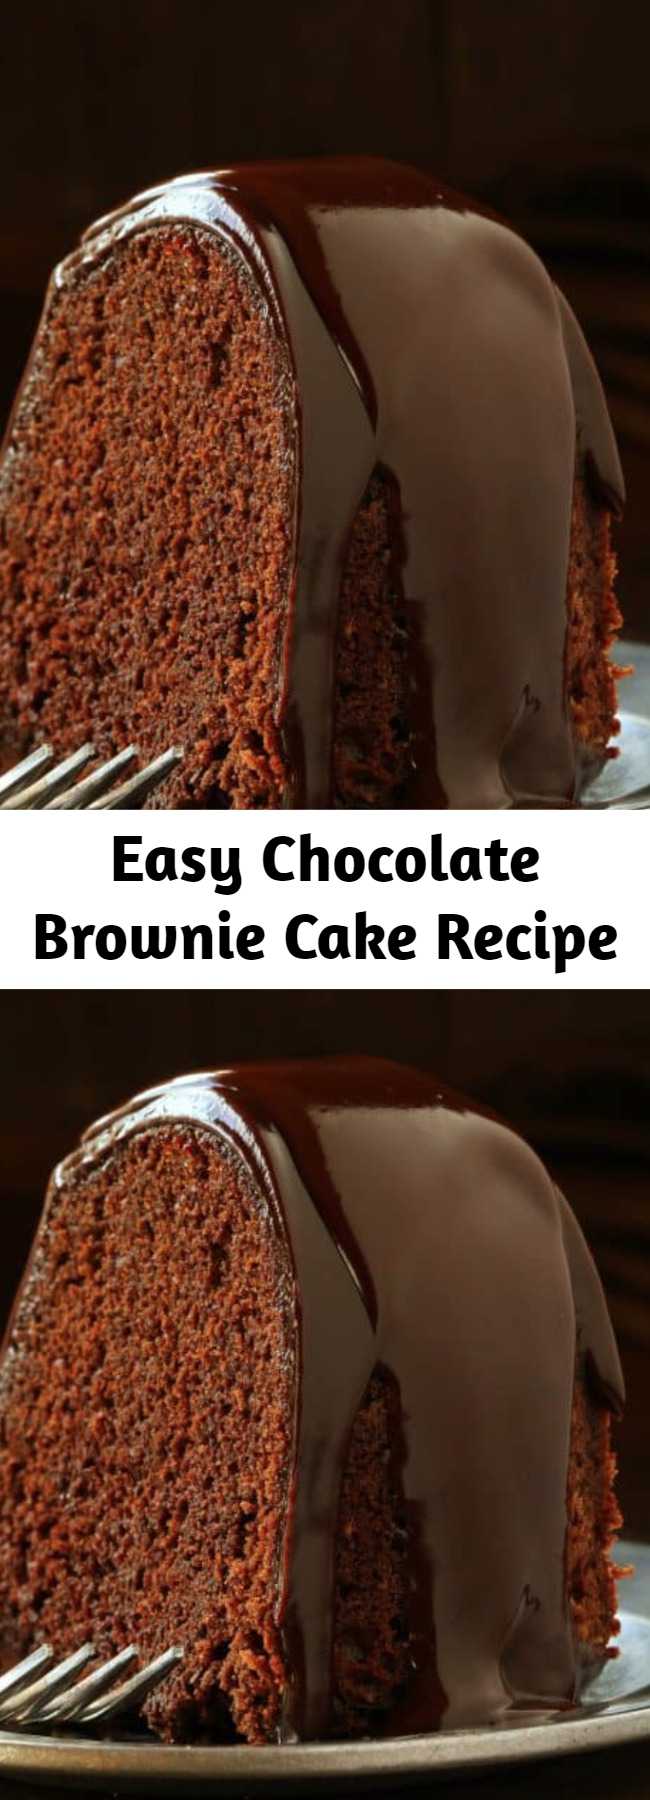 Easy Chocolate Brownie Cake Recipe - This delectable Chocolate Fudge Brownie Cake is the easiest chocolate cake I have ever made! I bake it for every occasion, including holidays! People are always shocked by the ingredients in this AMAZING cake... but Granny knew her stuff! Beyond easy but definitely impressive!